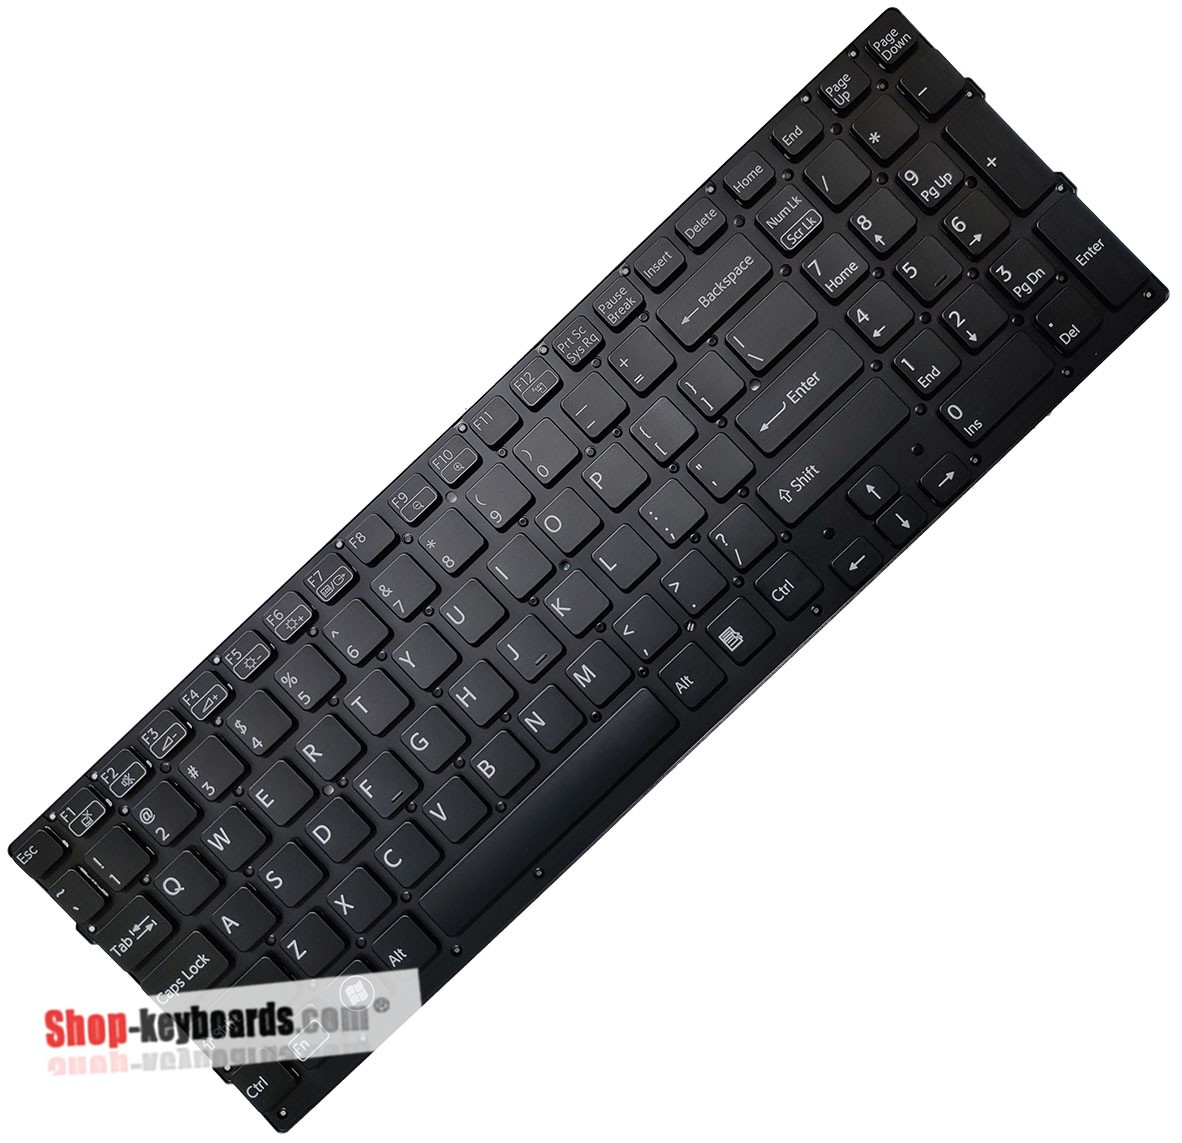 Sony VAIO VPC-F236HG Keyboard replacement